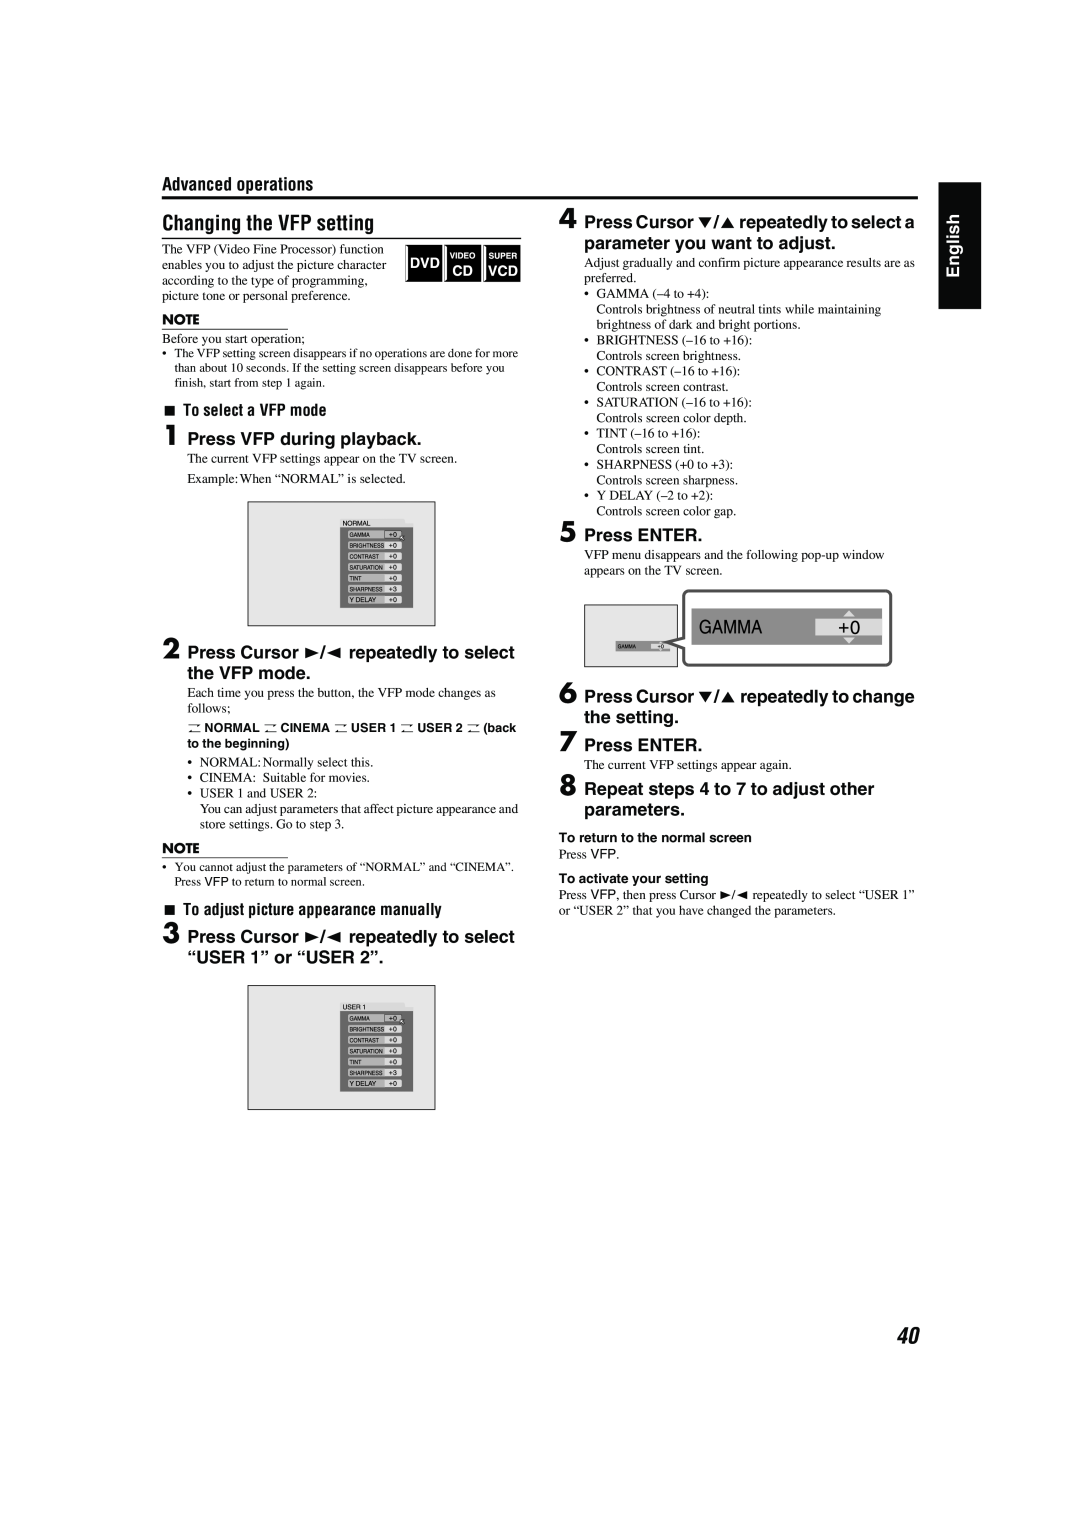 JVC TH-M42 Press Cursor //5repeatedly to select a, parameter you want to adjust, Changing the VFP setting, Press ENTER 